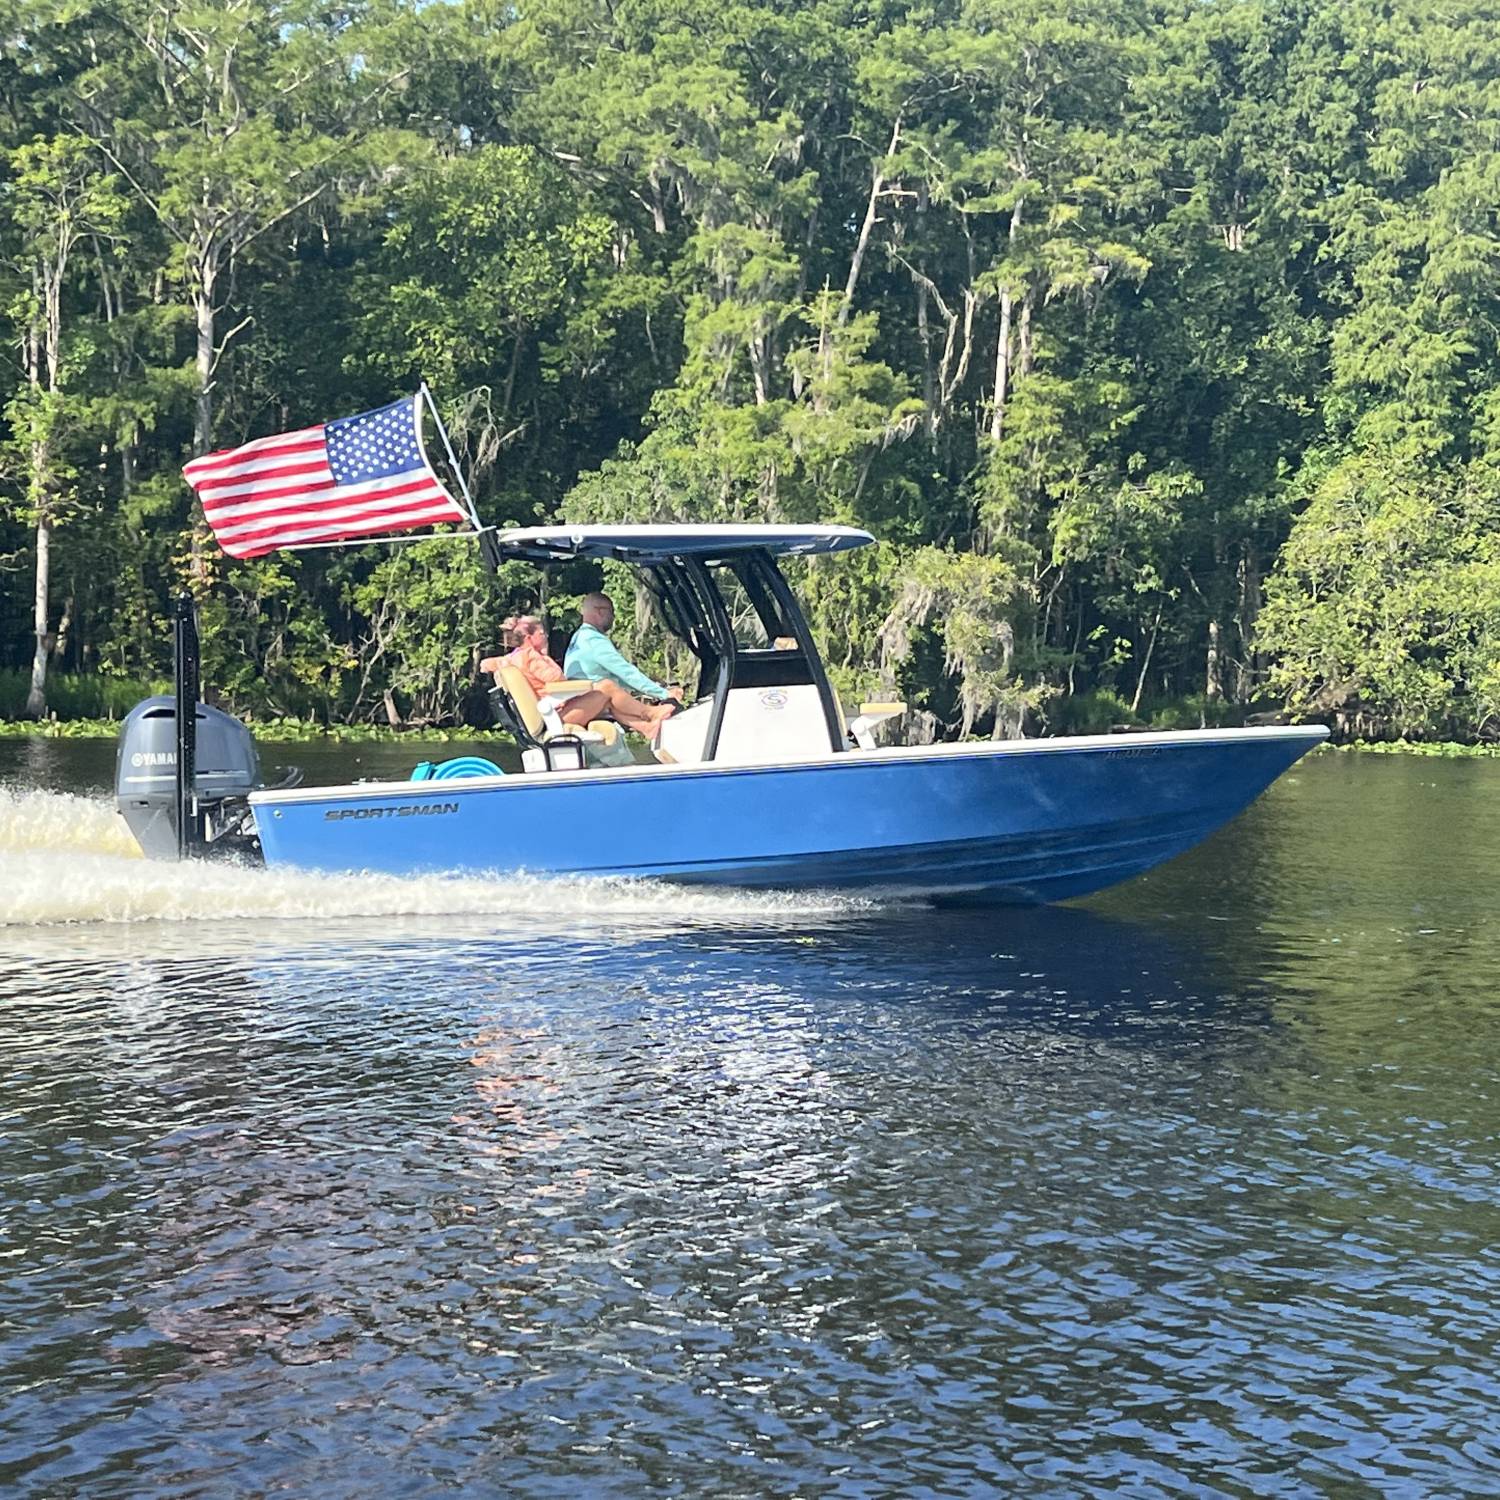 Title: All American - On board their Sportsman Masters 247OE Bay Boat - Location: St. John’s River. Participating in the Photo Contest #SportsmanAugust2023